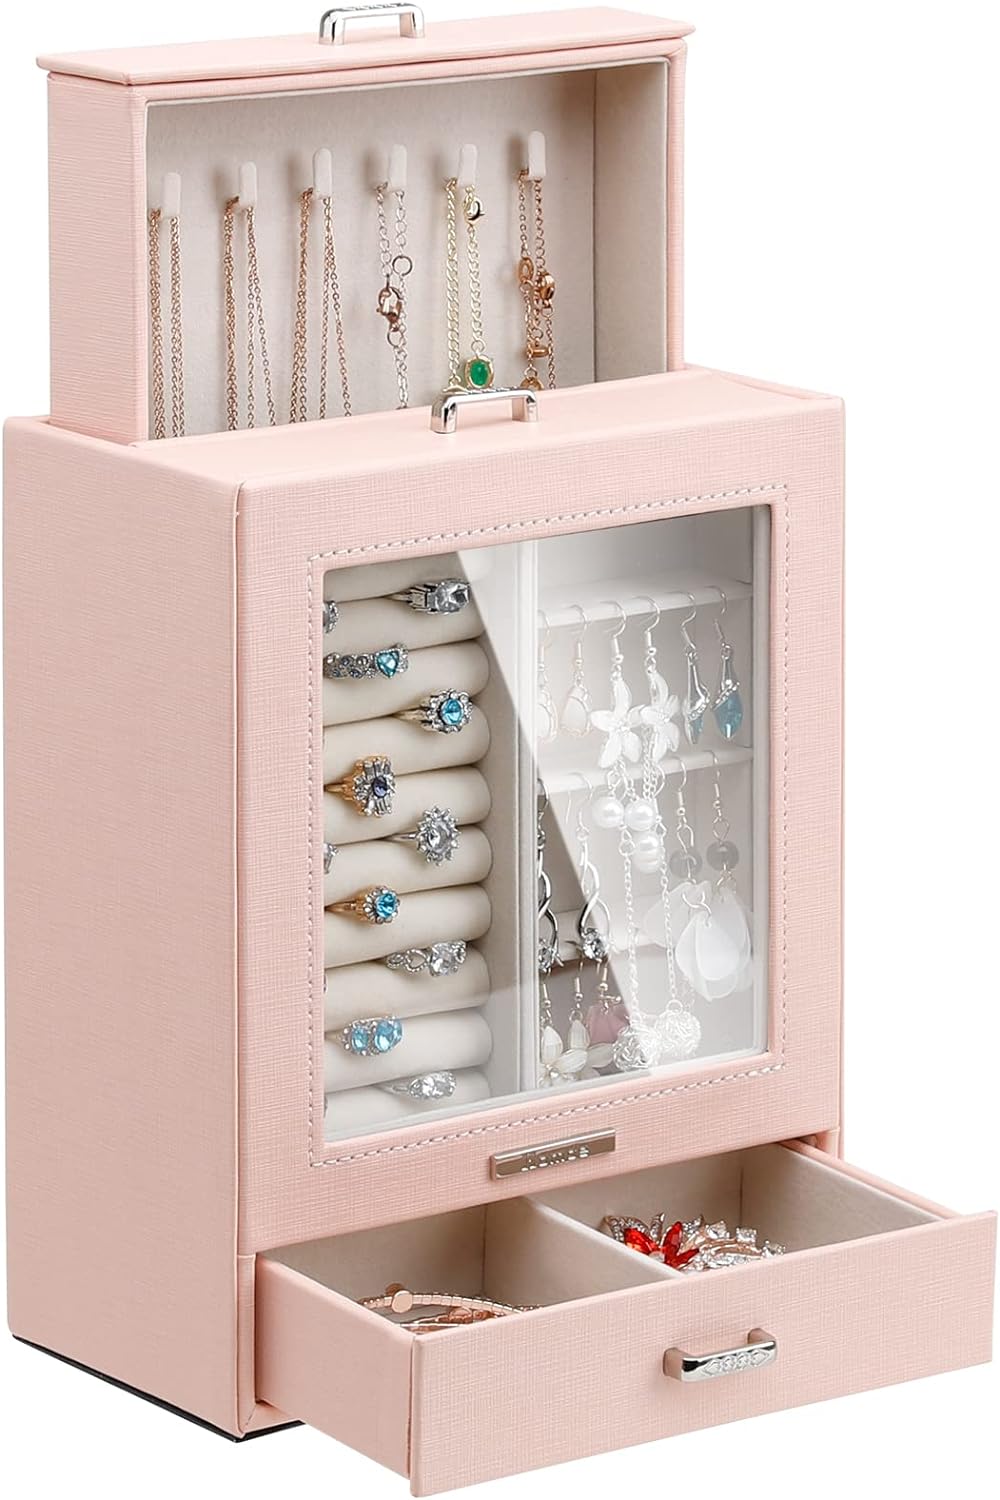 Homde Jewelry Organizer Girls Women Jewelry Box for Necklaces Rings Earrings Gift Jewelry Storage Case (Peach Pink)